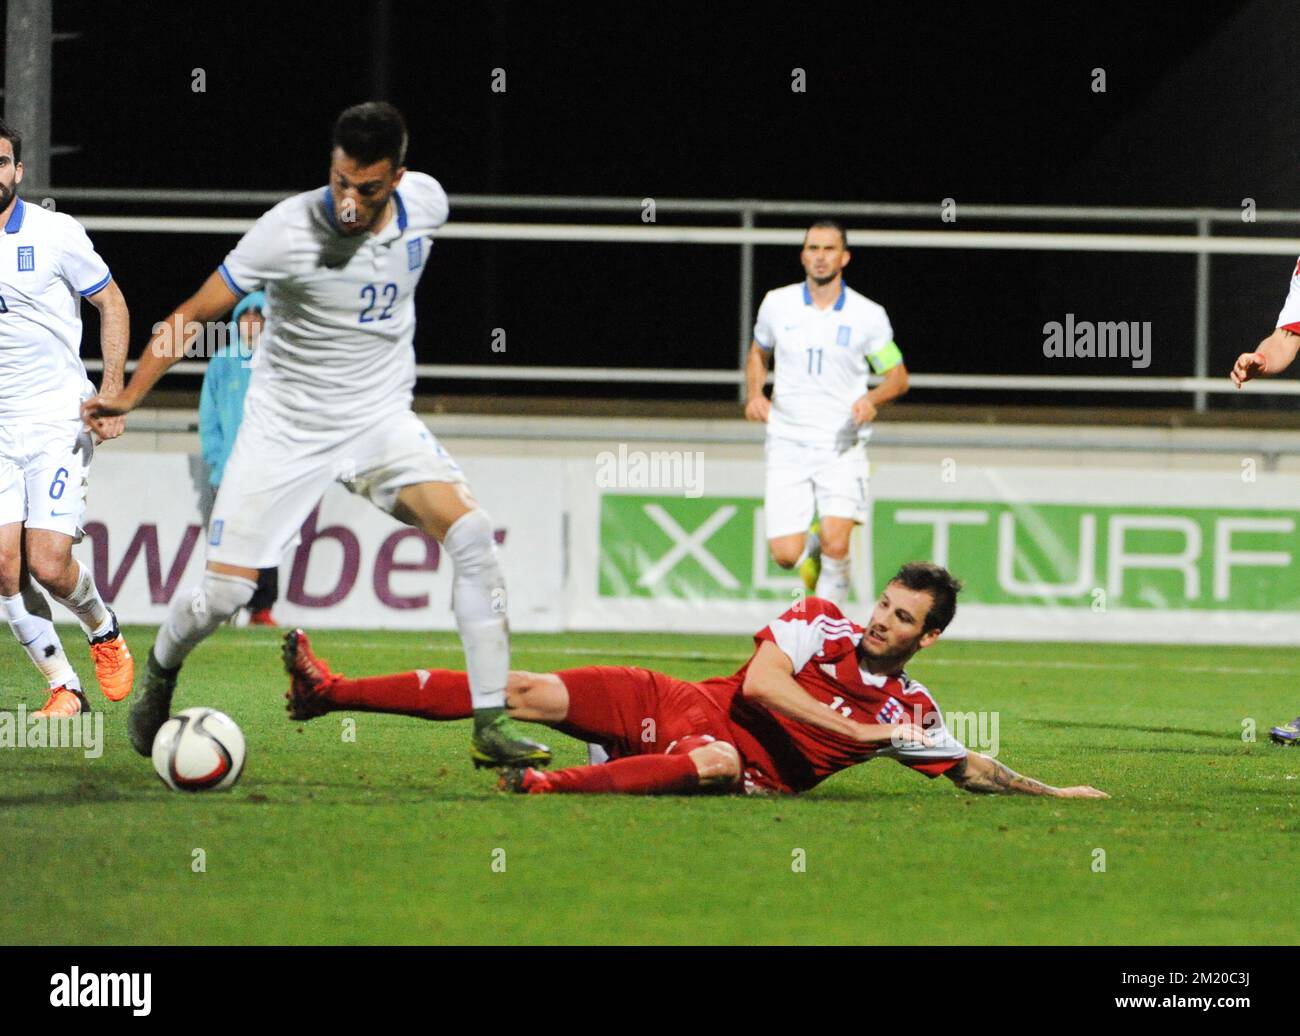 20151113 - DIFFERDANGE, LUXEMBOURG: Greece's Andreas Samaris and Luxembourg's Stefano Bensi fight for the ball during a friendly soccer game between Luxembourg national team and Greece, in Differdange, Luxembourg, Friday 13 November 2015. BELGA PHOTO SOPHIE KIP Stock Photo